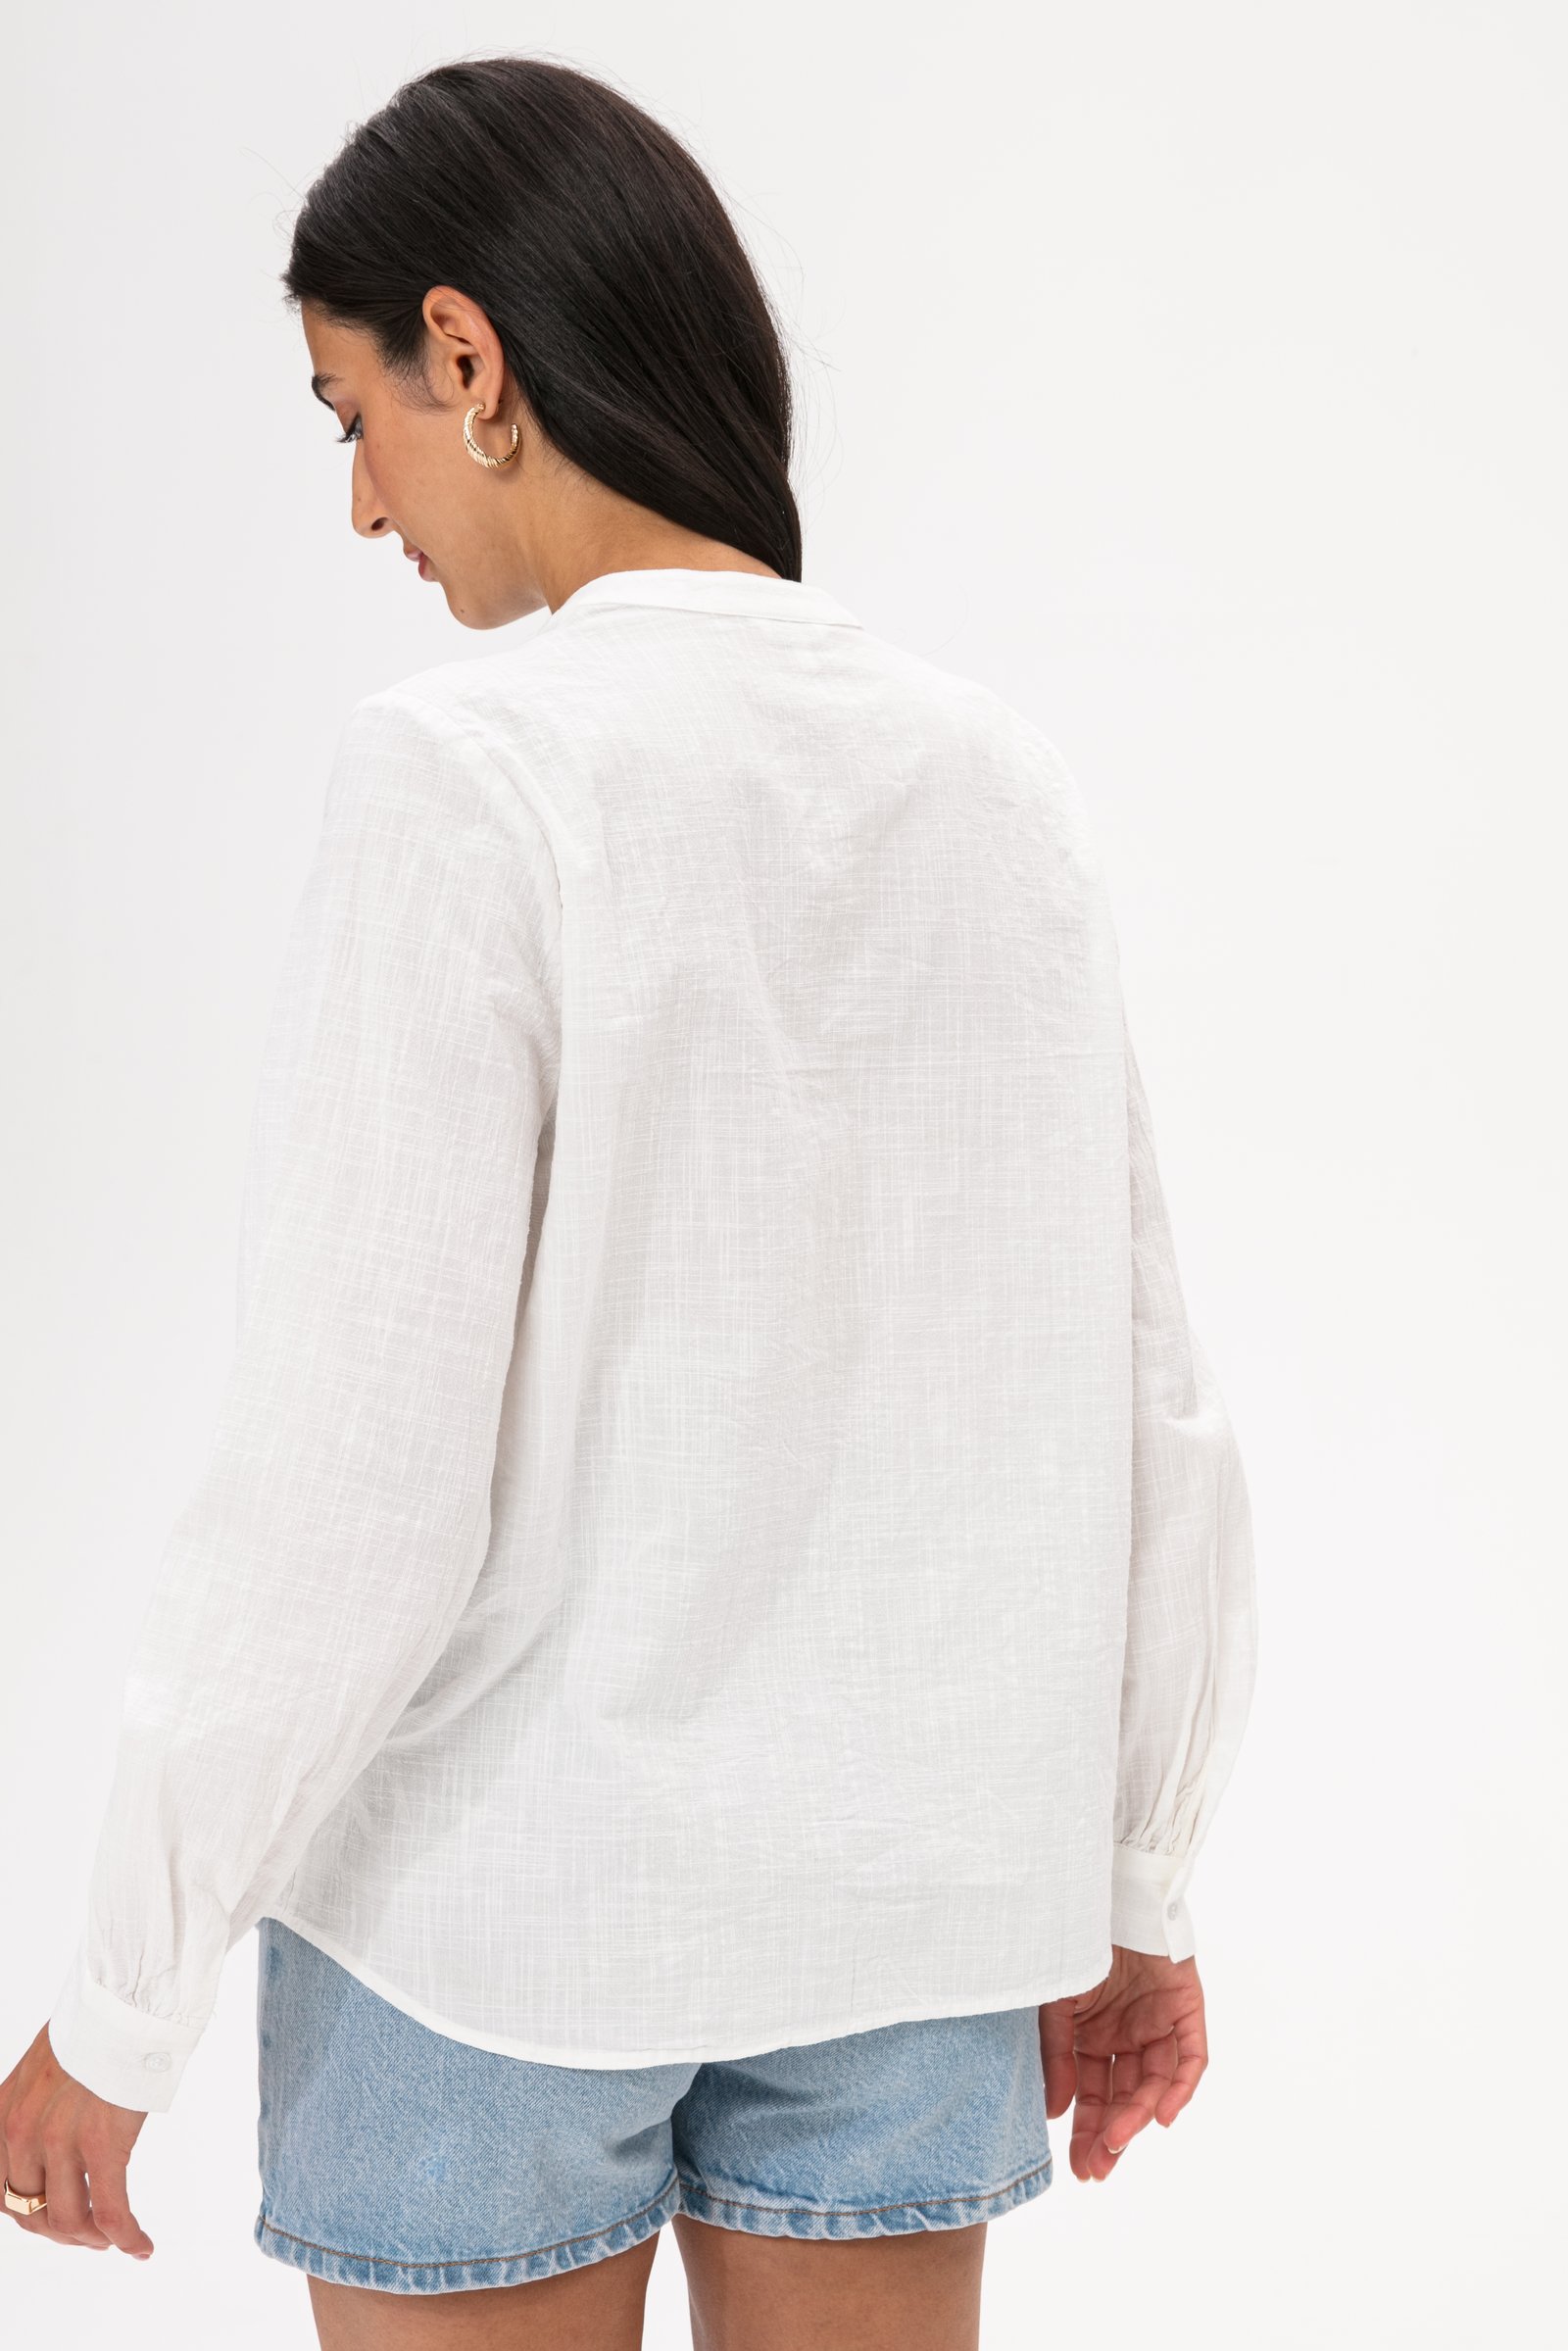 Embroidered white blouse Image 3